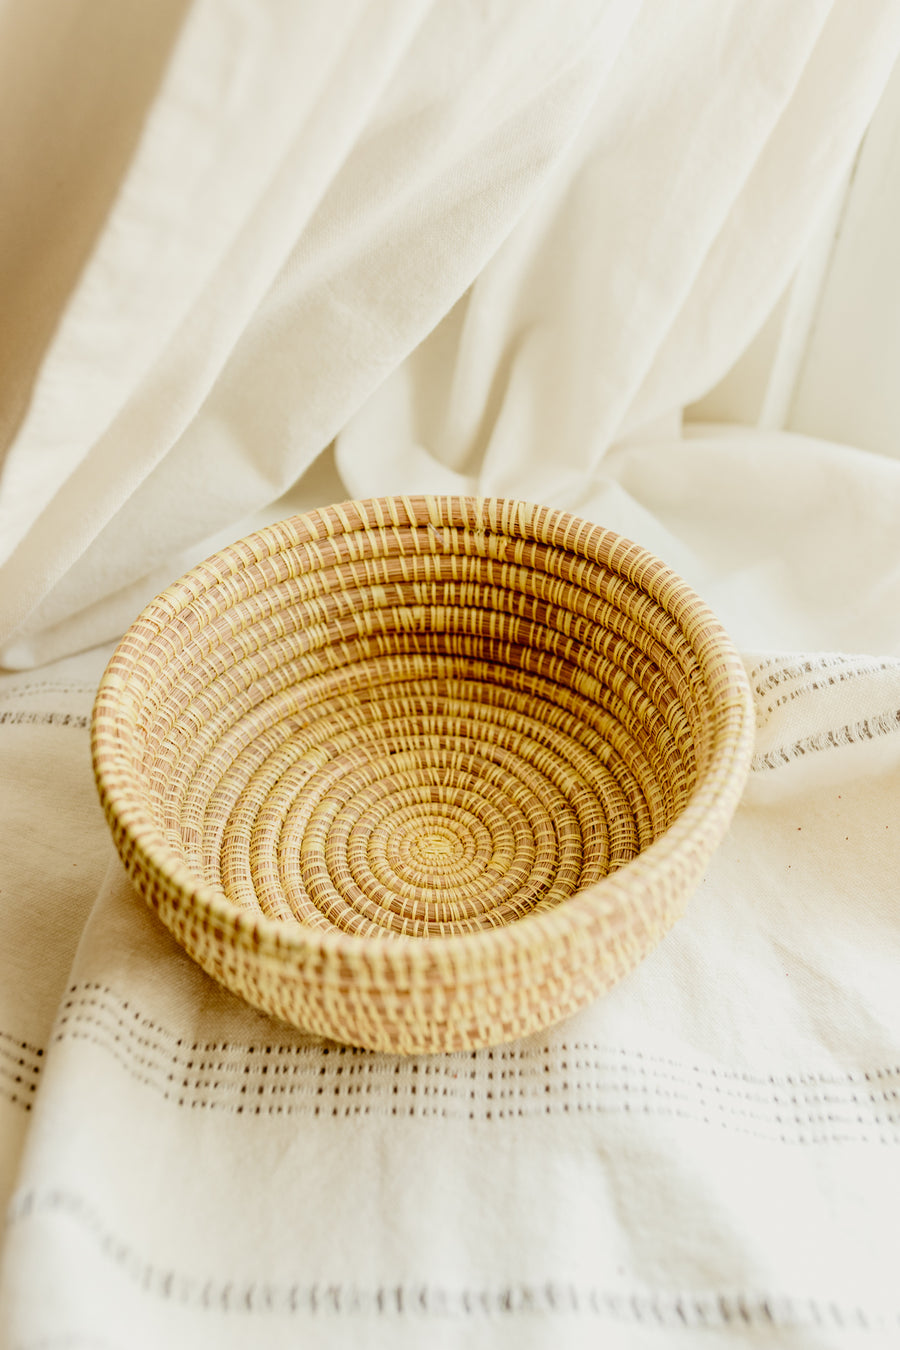 Woven Baskets | Small